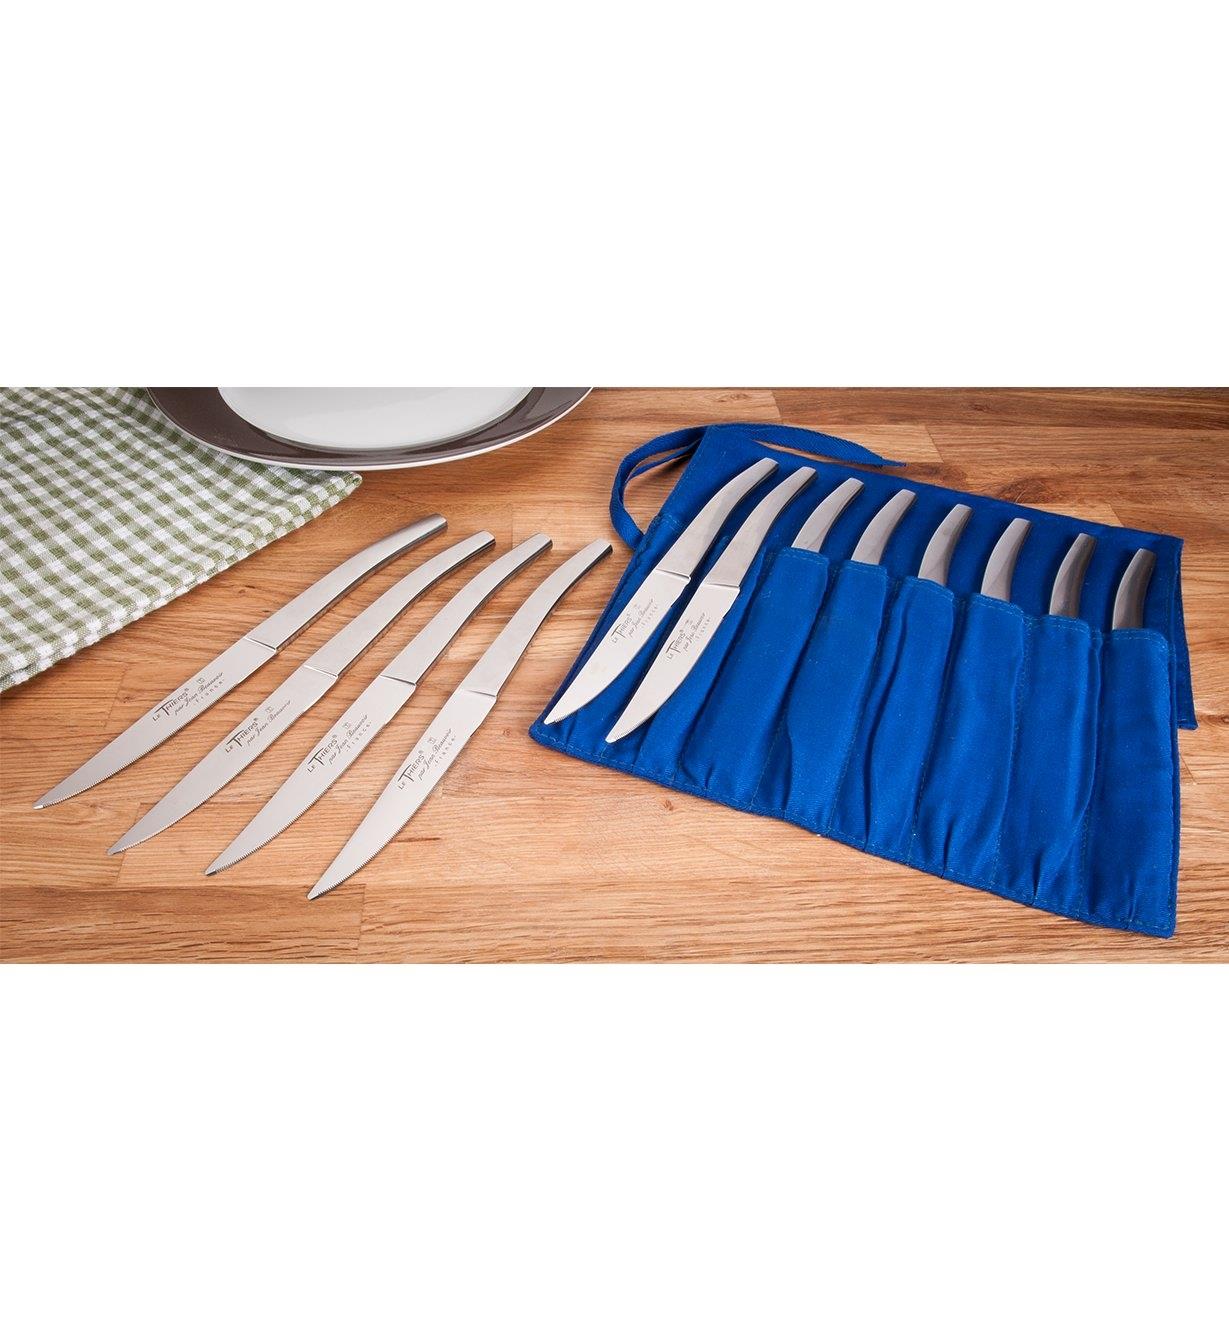 Set of eight bistro knives in roll beside set of four on dining table